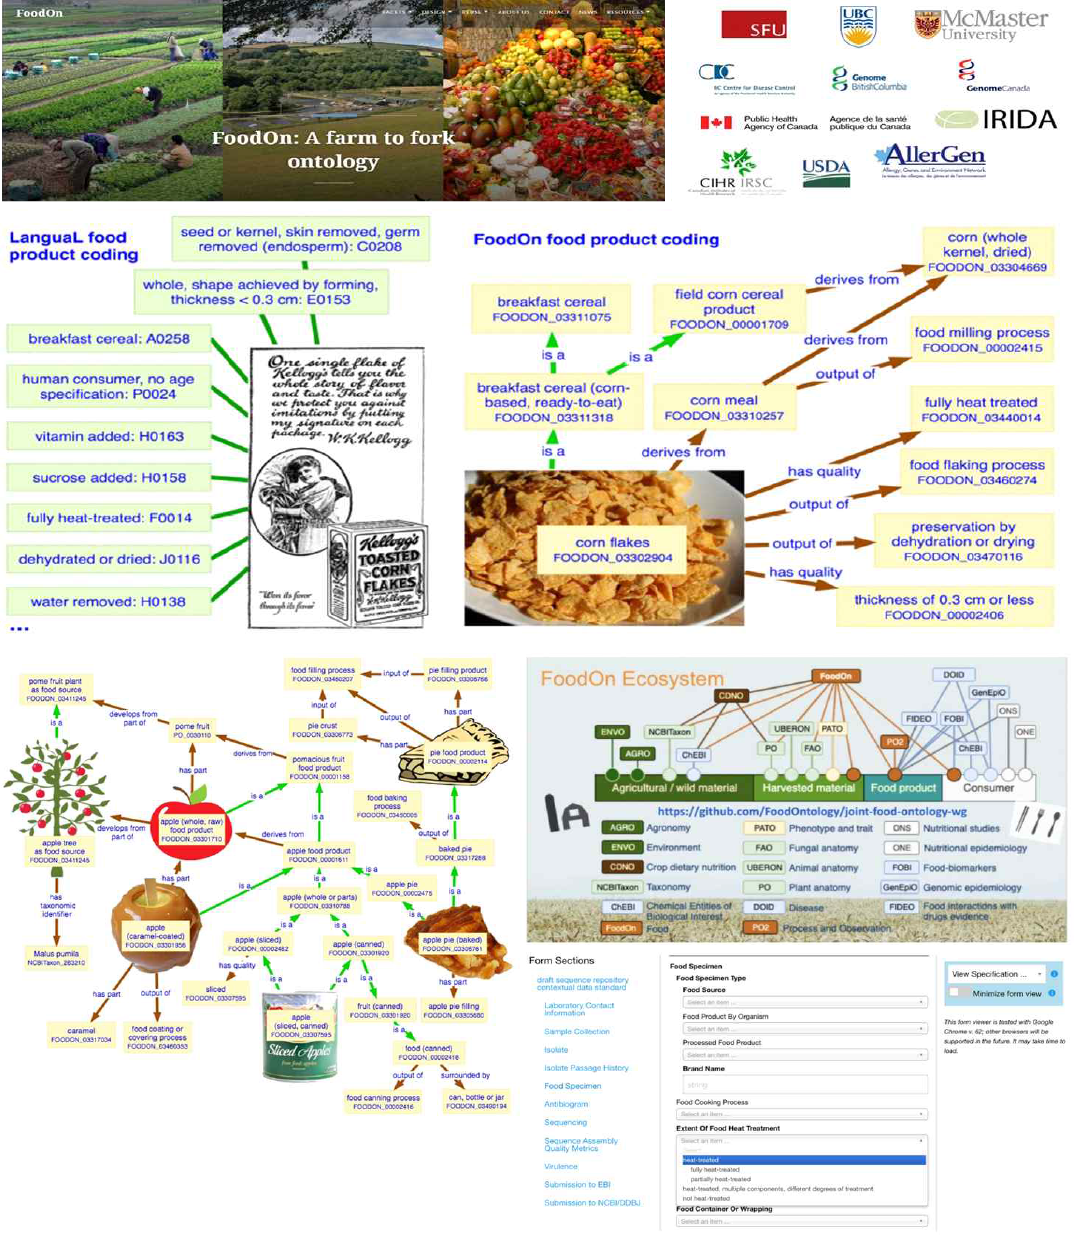 FoodOn Ecosystem의 코딩 및 데이터 연계 모식도 [출처] Damion M. Dooley, et al., 2018. FoodOn: a harmonized food ontology to increase global food traceability, quality control and data integration. NPJ Science of Food 2:23